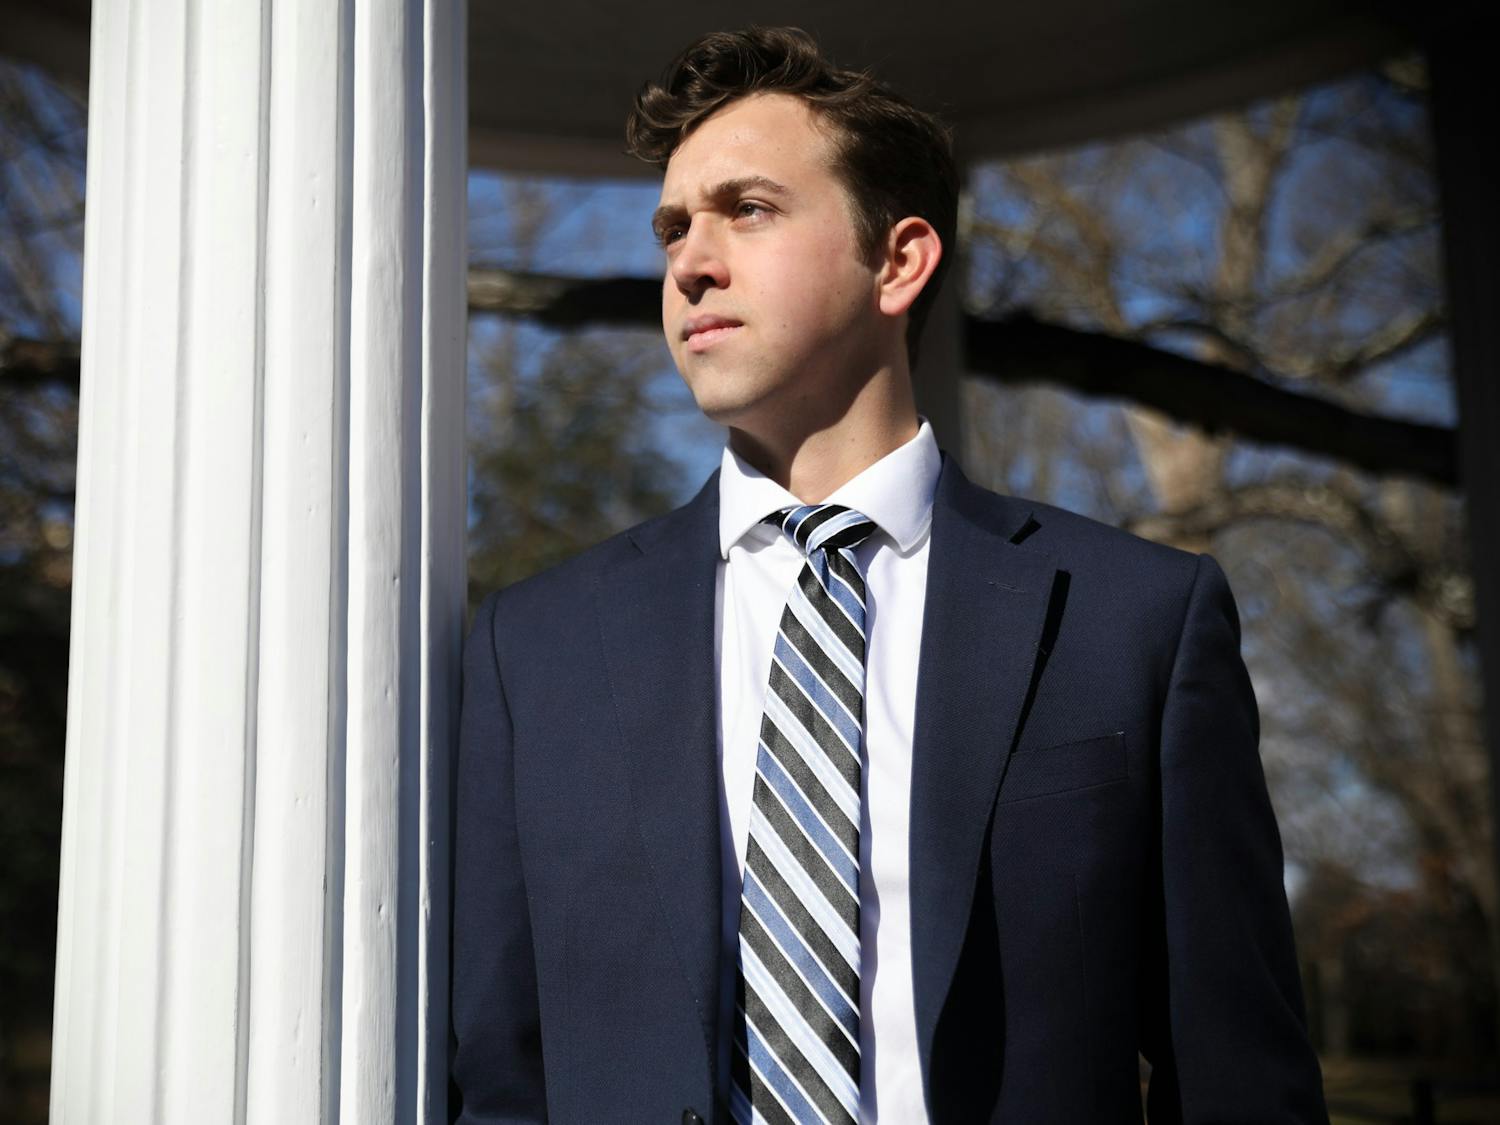 Ethan Phillips, a candidate for student body president, stands by the Old Well on Saturday, Feb. 5, 2022.  